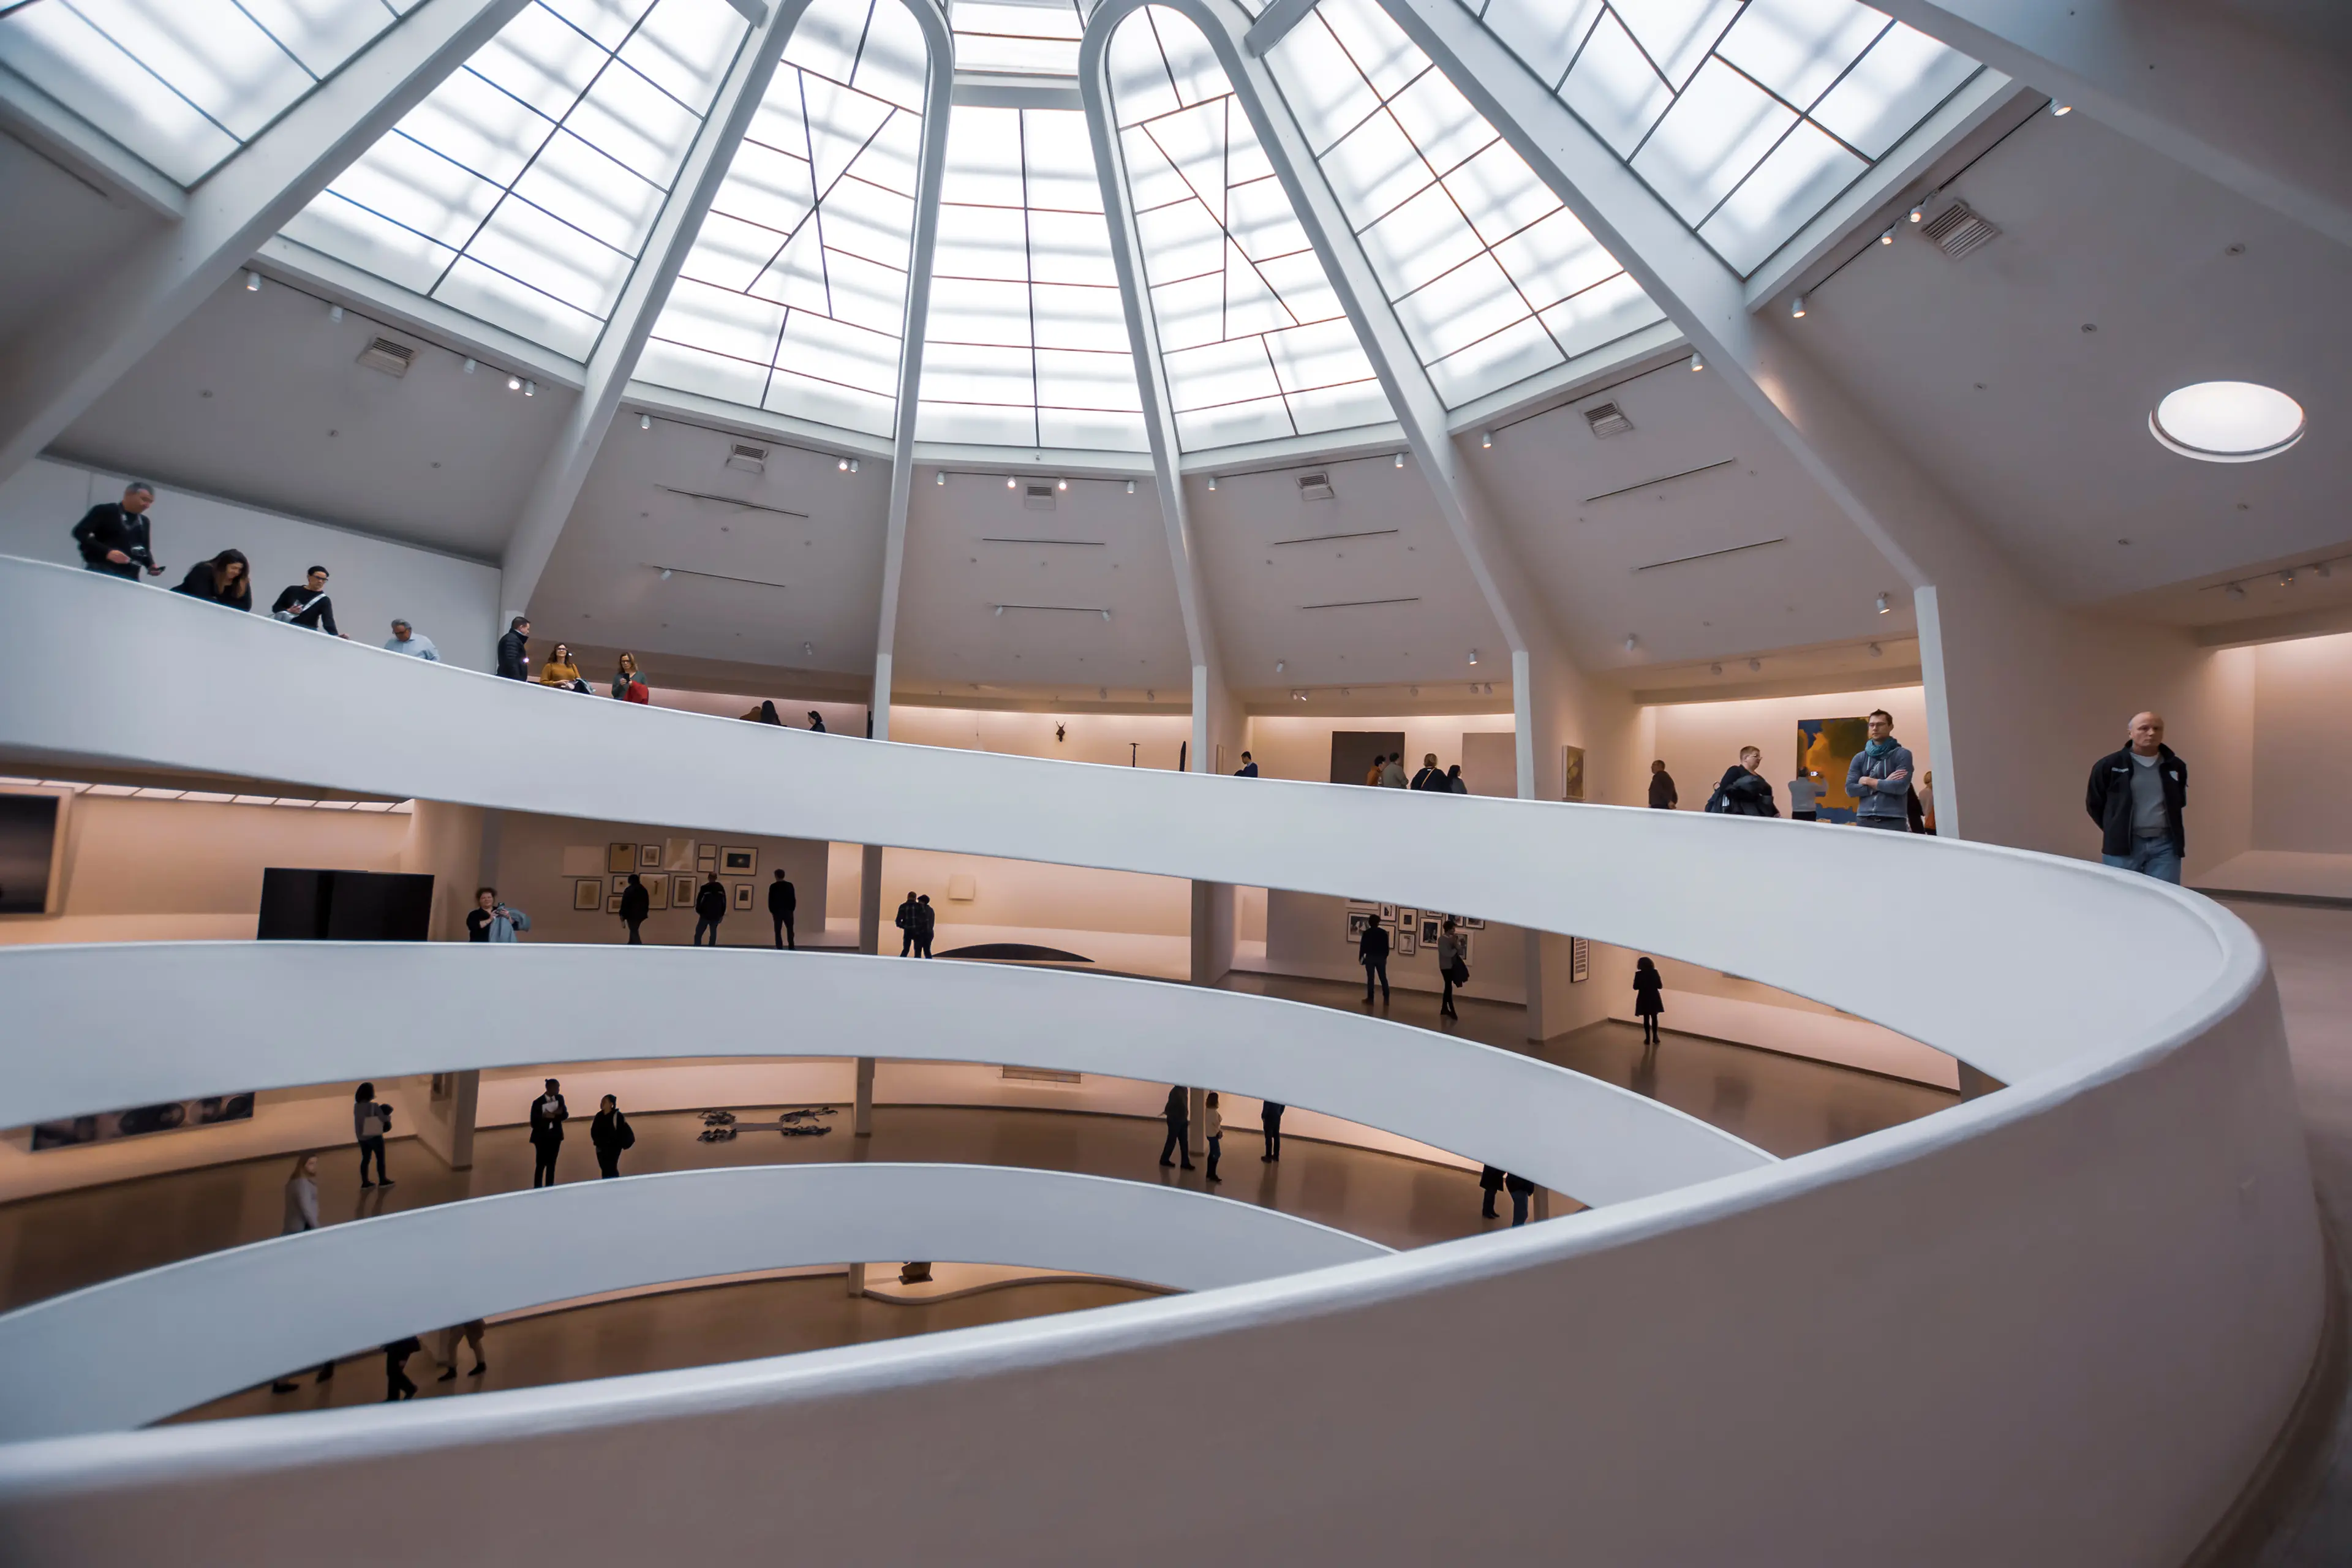 Interior of the famous Guggenheim Museum in the 5th Avenue